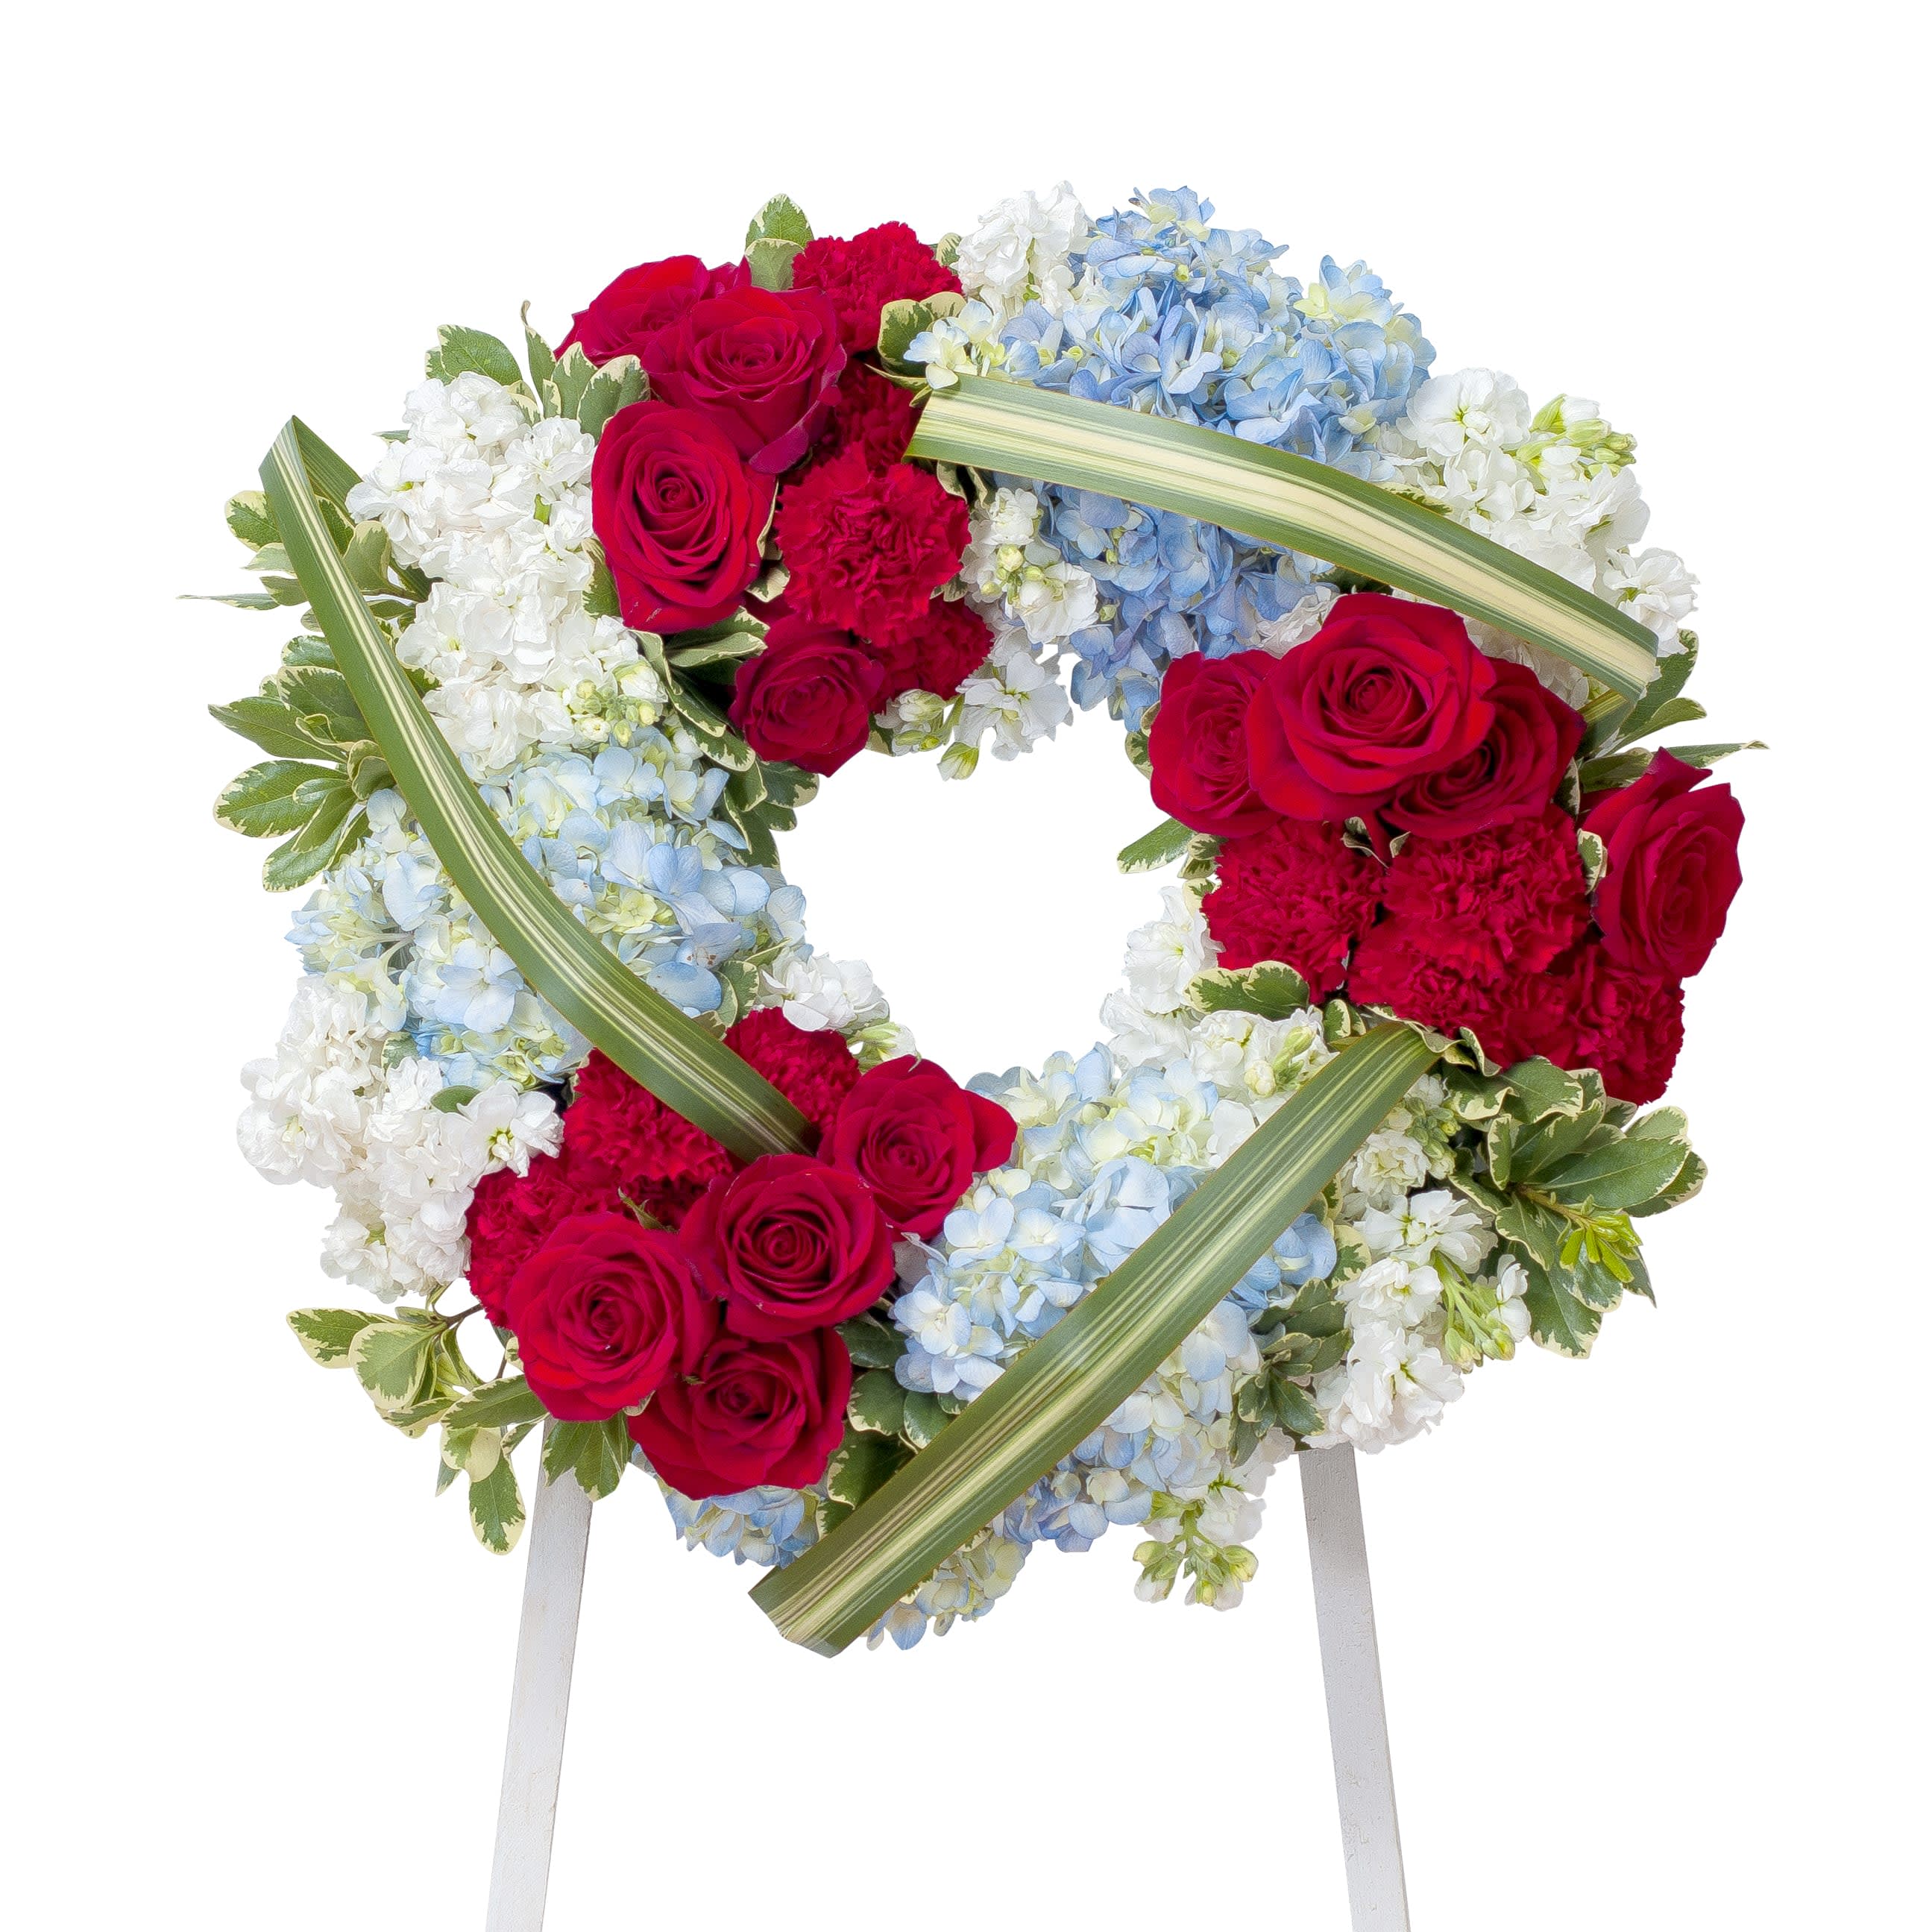 Honor Wreath - This beautiful red, white and blue casket spray gives tribute to the one who served with honor.